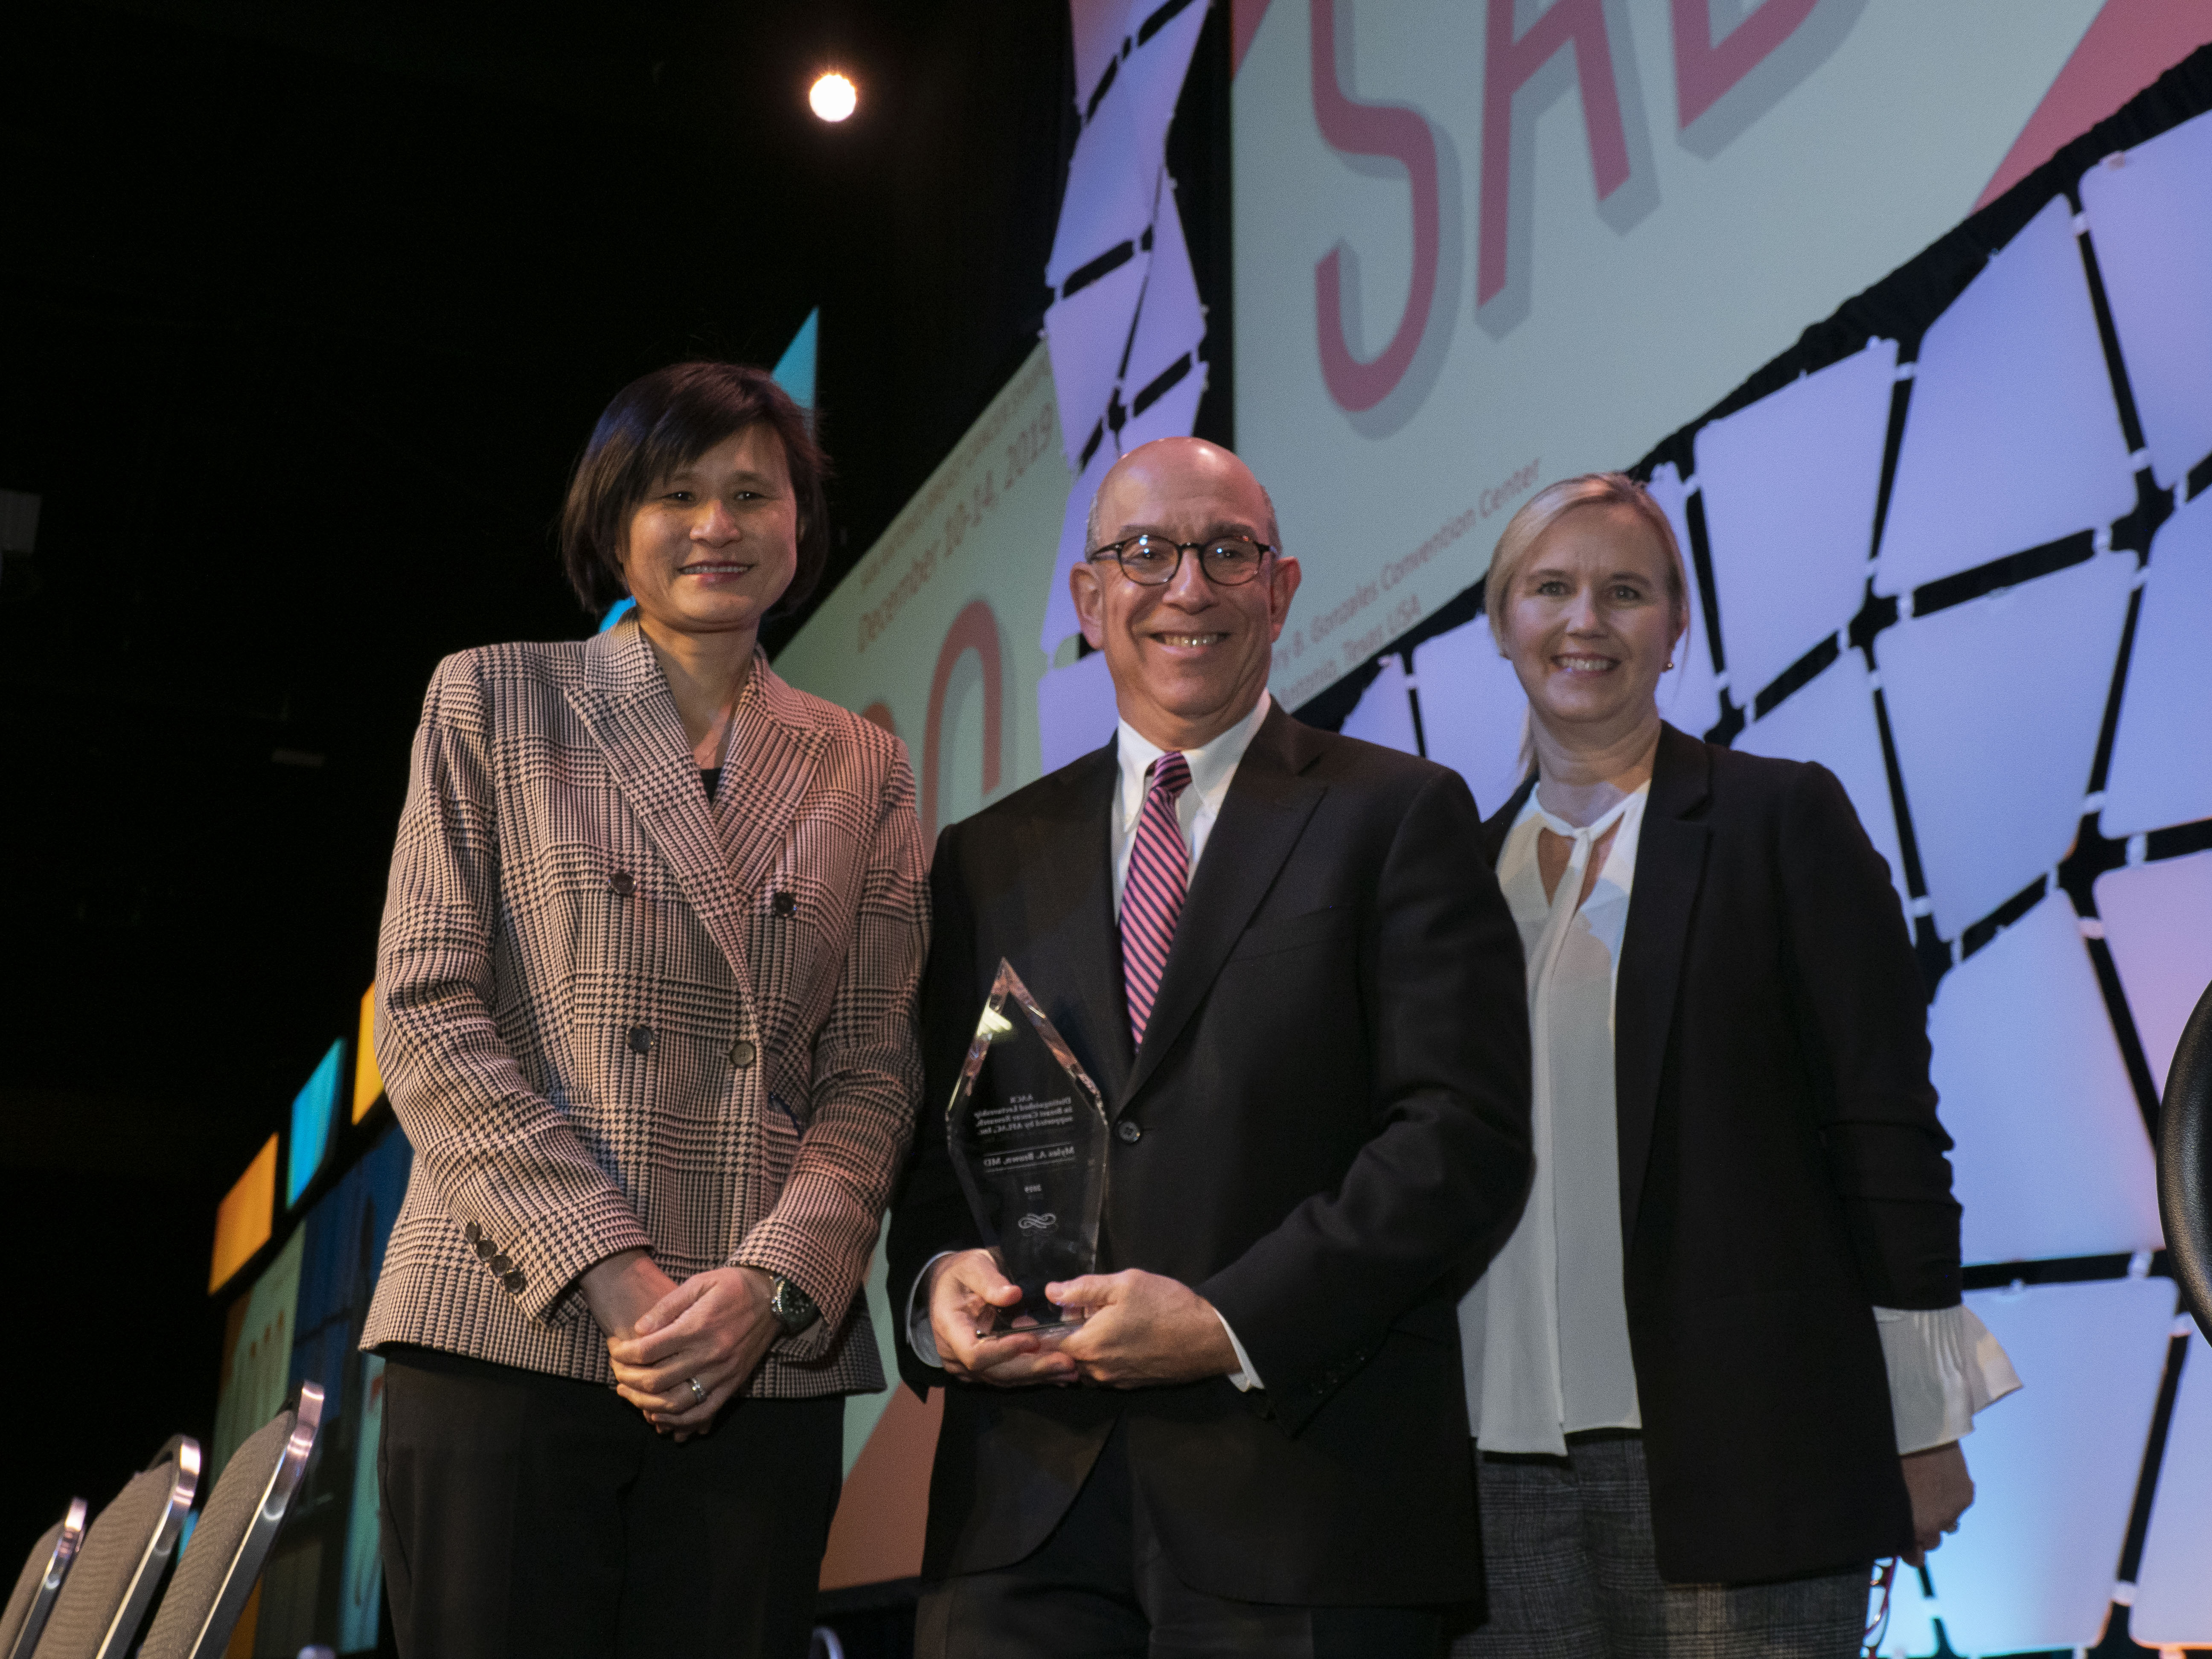 BCRF Researchers Honored at the 2019 San Antonio Breast Cancer Symposium